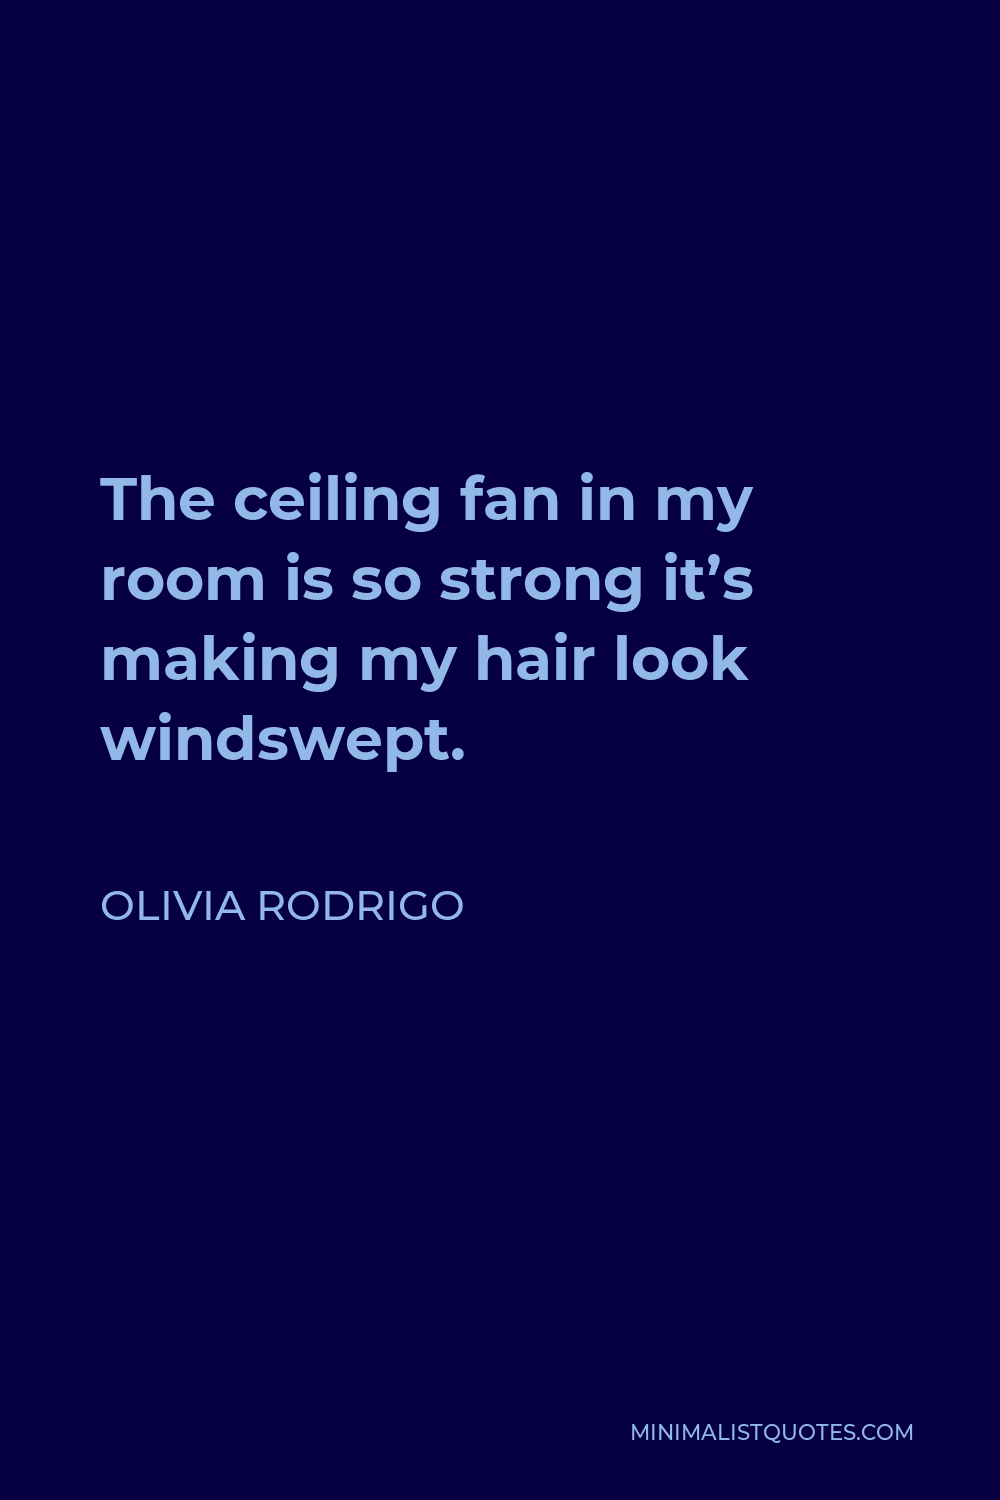 Olivia Rodrigo Quote - The ceiling fan in my room is so strong it’s making my hair look windswept.